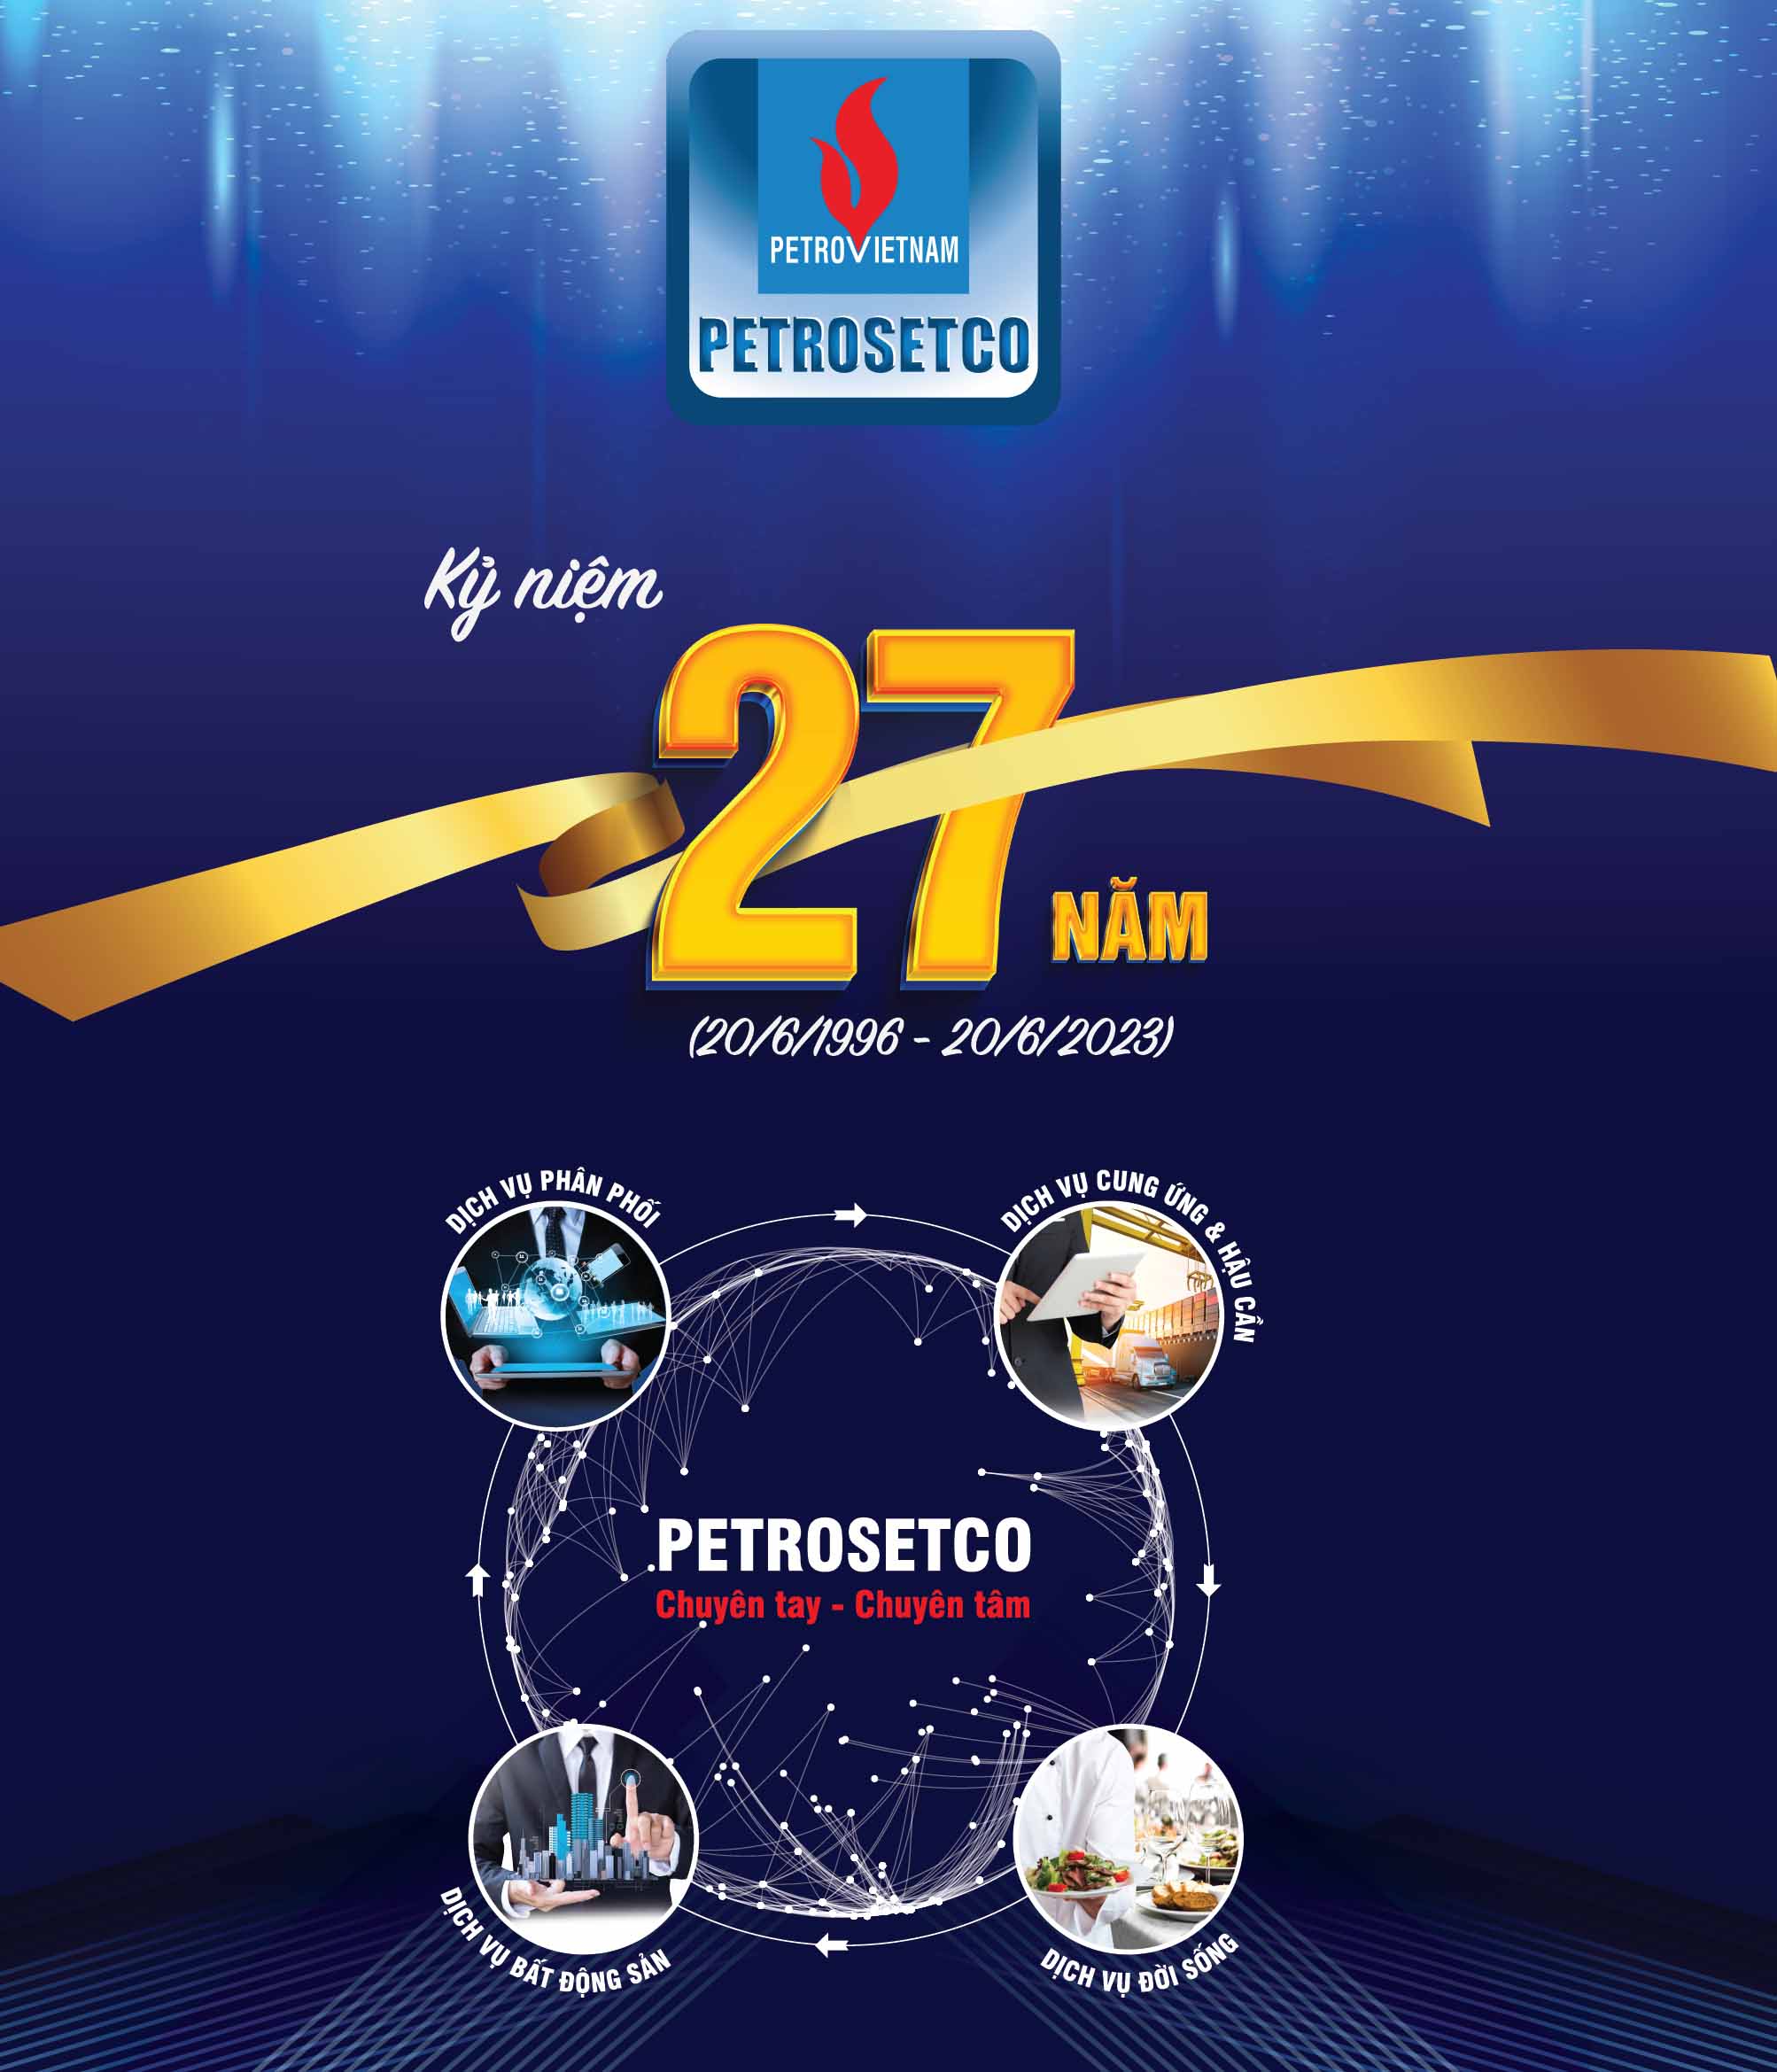 PETROSETCO’S the 27th anniversary: Affirming the commitment of "Specialist - Dedicated"